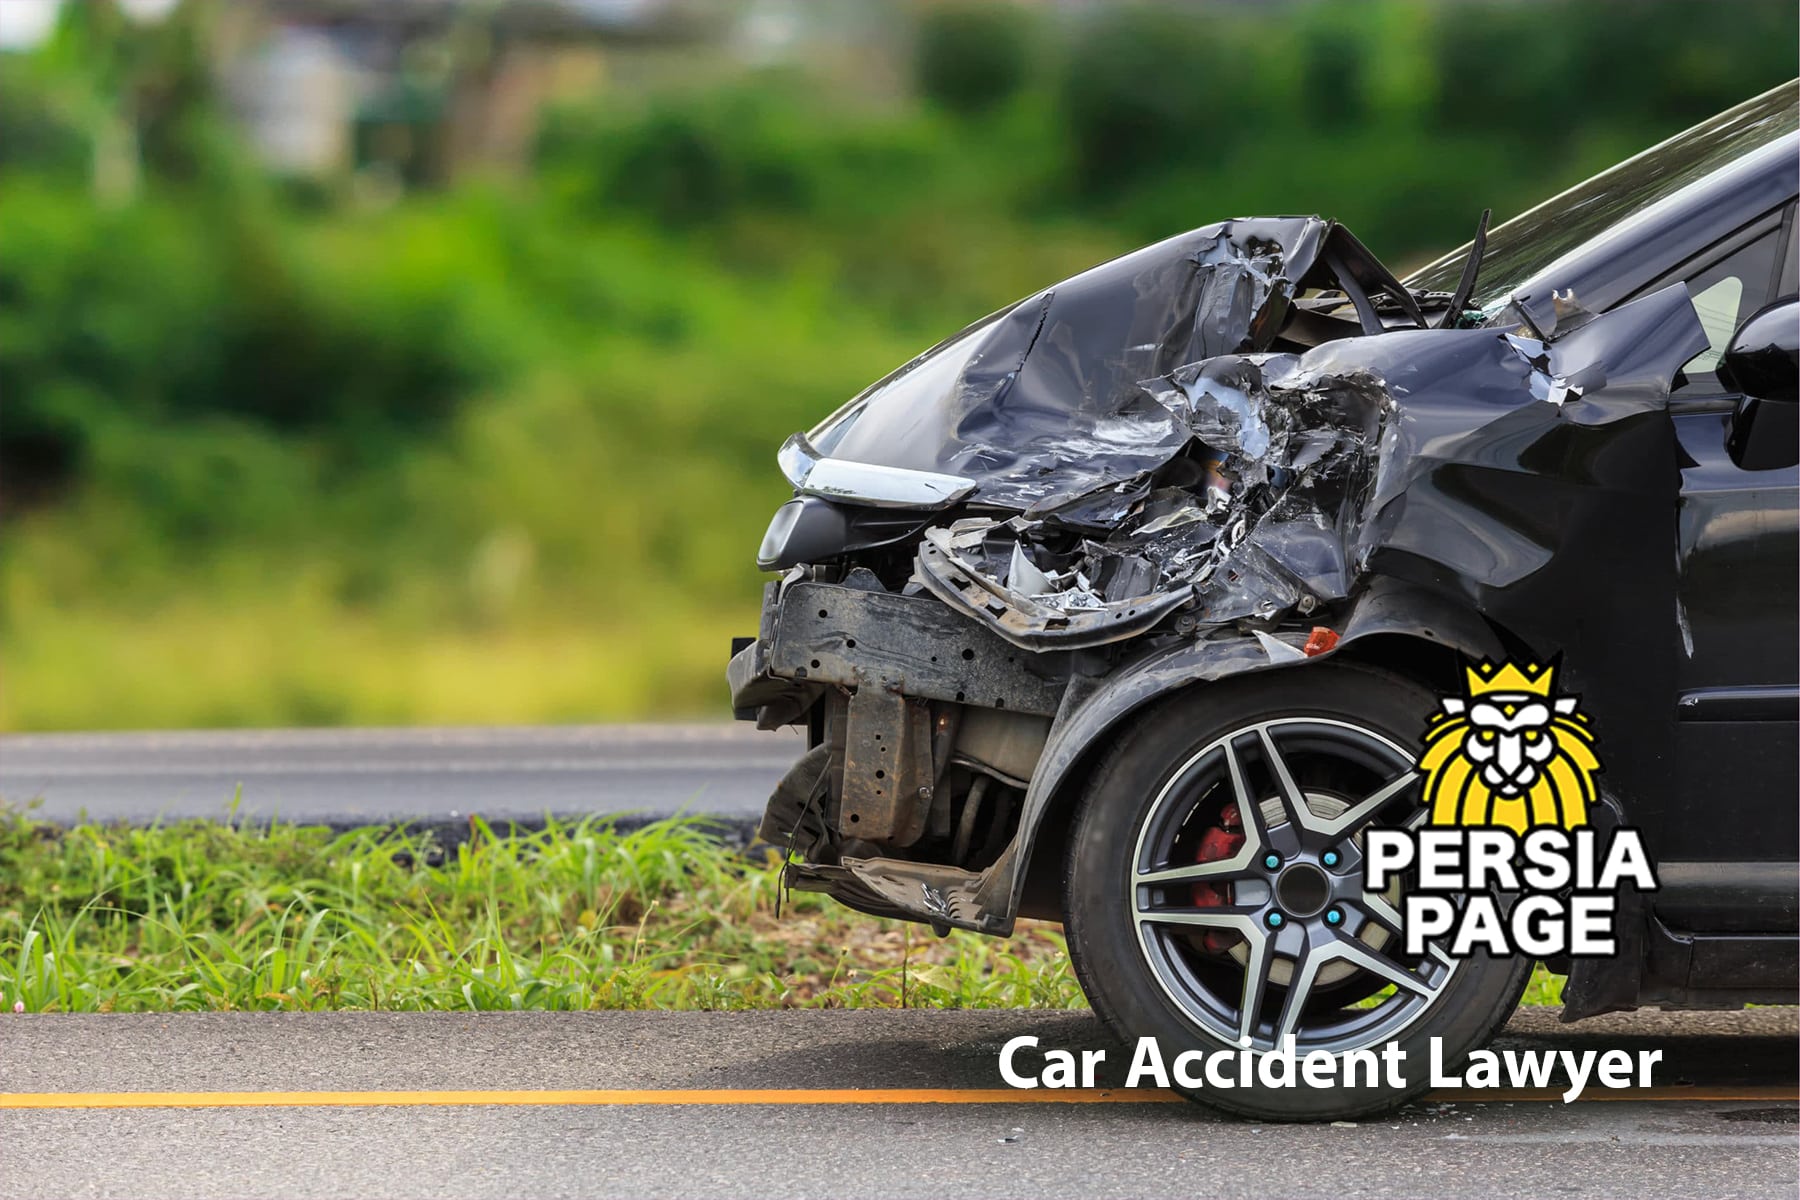 5 Things to Search for When Choosing a Car Accident Lawyer-B